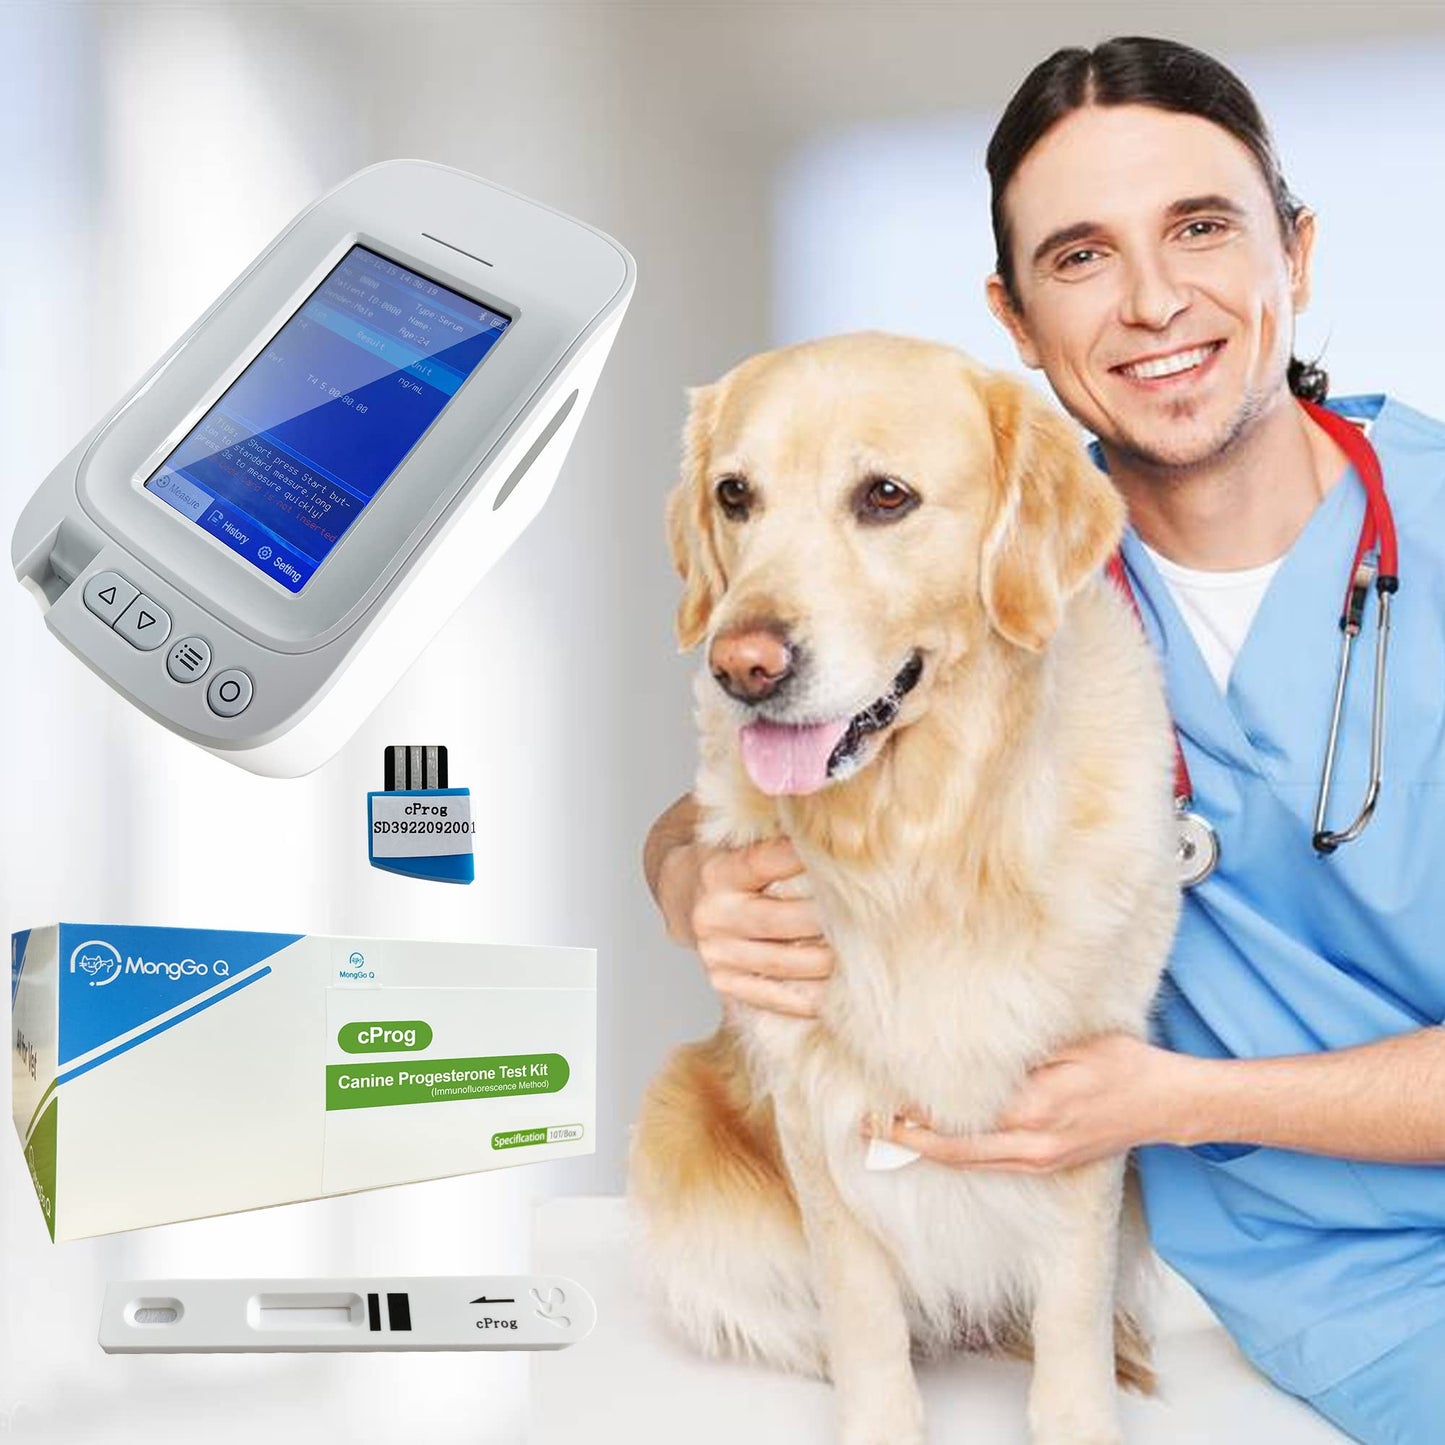 Canine Pregnancy Test Kit for Dog, Dog Pregnancy Test Convenient Fast and Accurate Easy to Use Results Detection for Dog